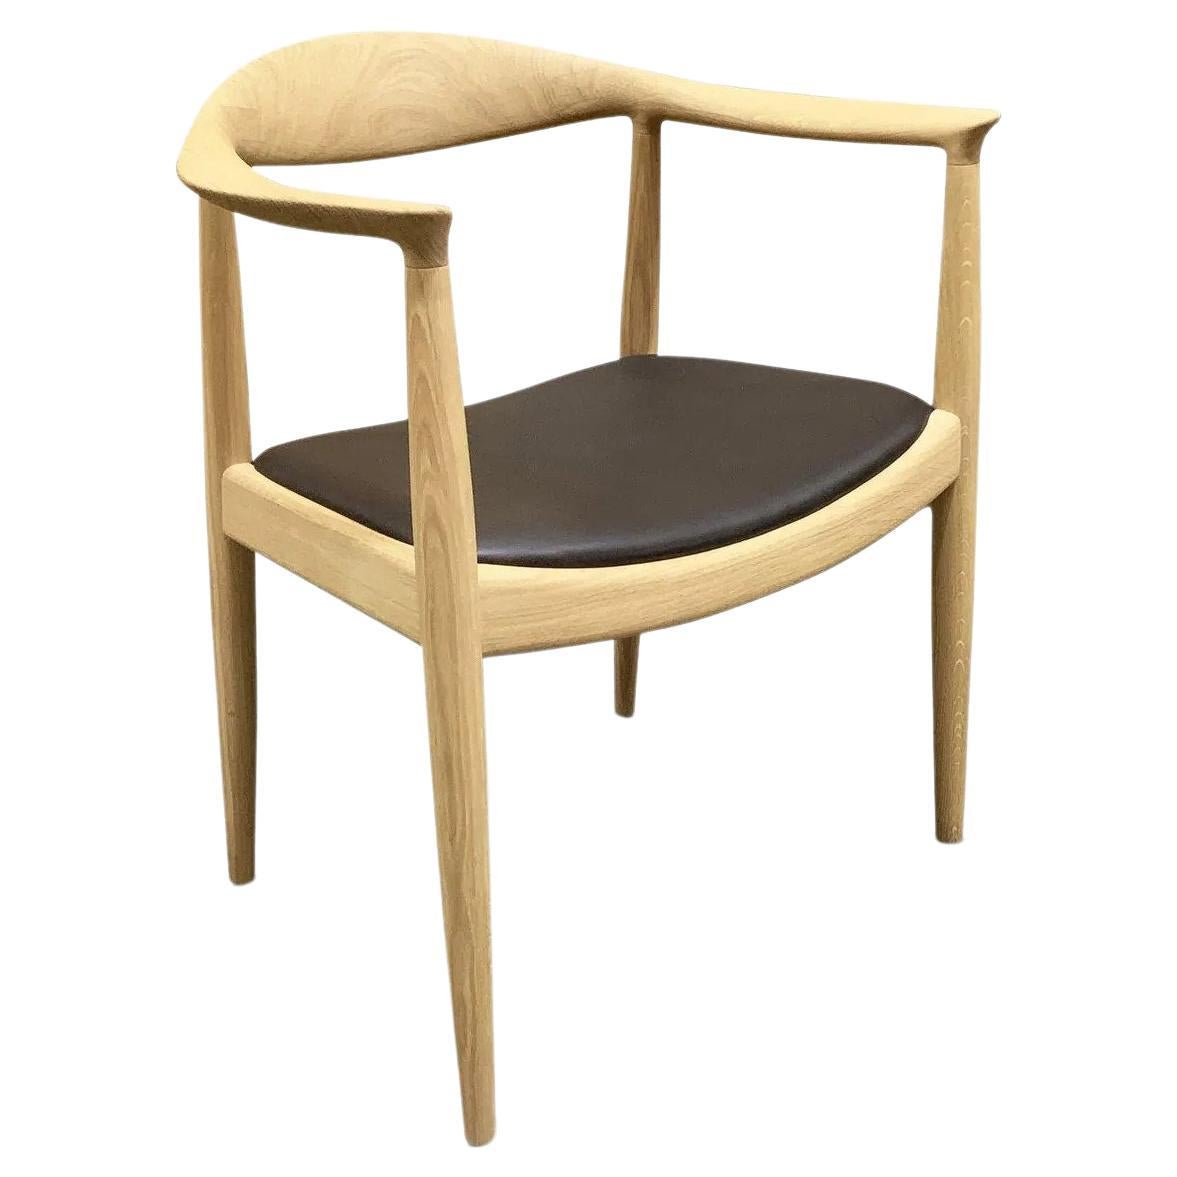 Hans Wegner Round Chair "The Chair" in White Oak For Sale